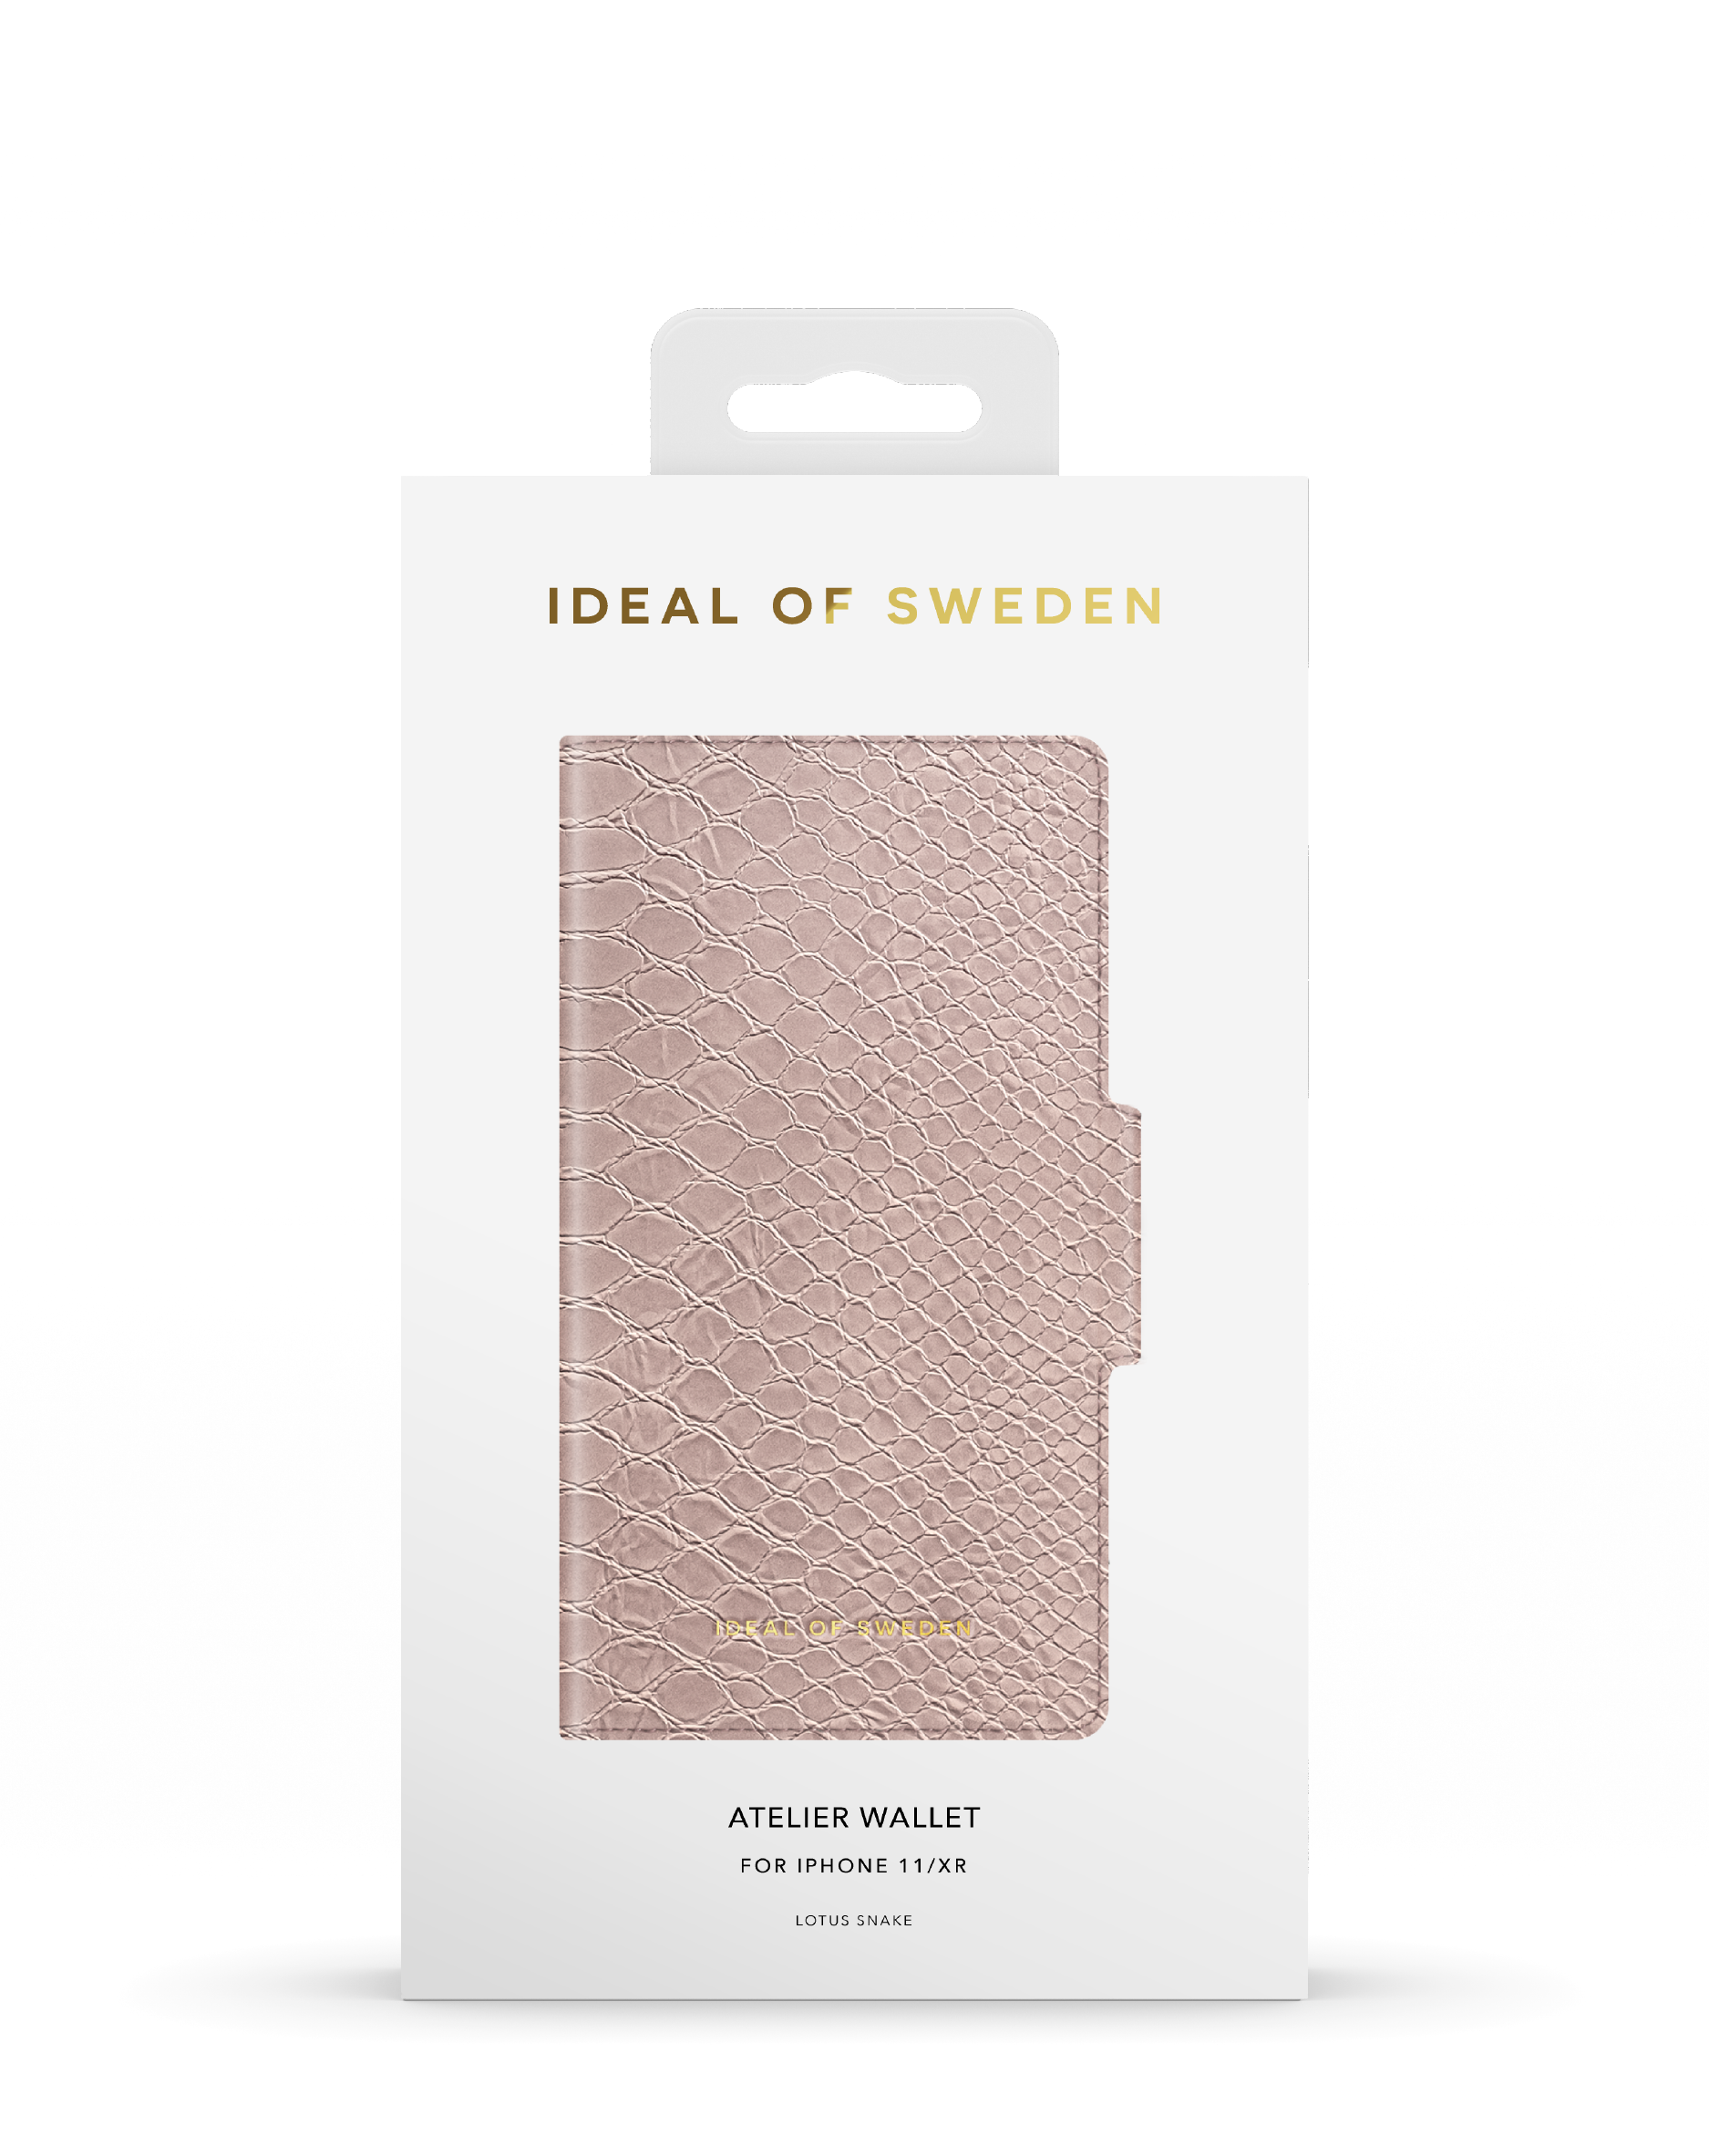 IDAW-I1961-234, iPhone Snake SWEDEN 11 IDEAL iPhone / OF XR, Bookcover, Lotus Apple,